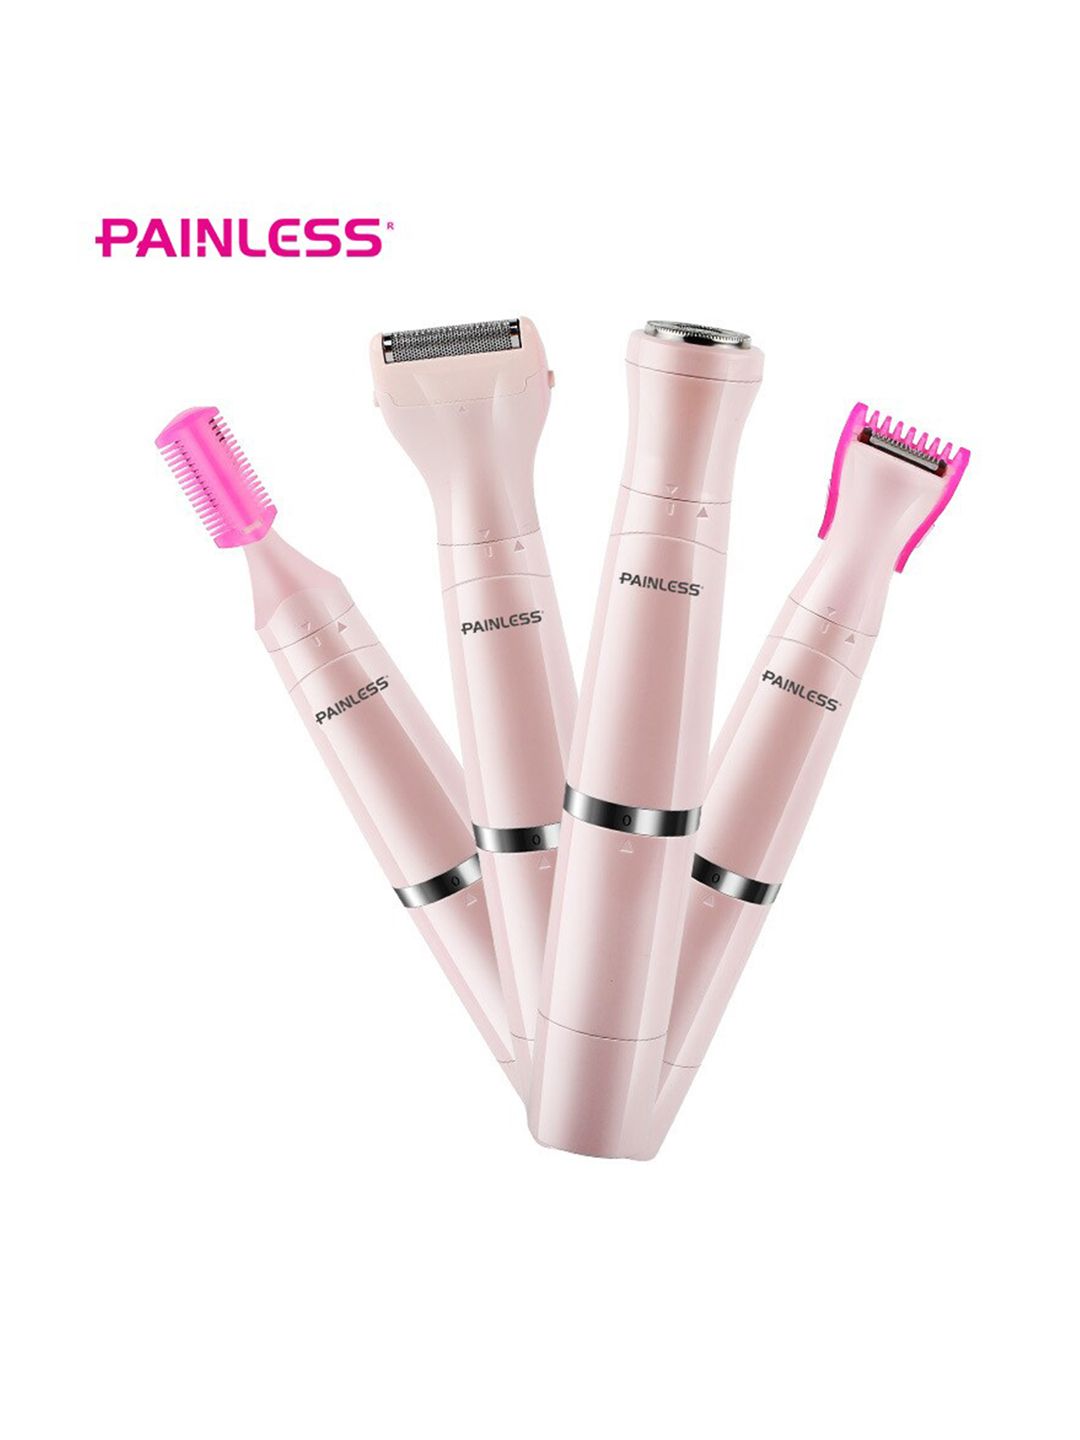 PAINLESS 4 In 1 USB Bikini & Body Hair Removal Trimmer Price in India